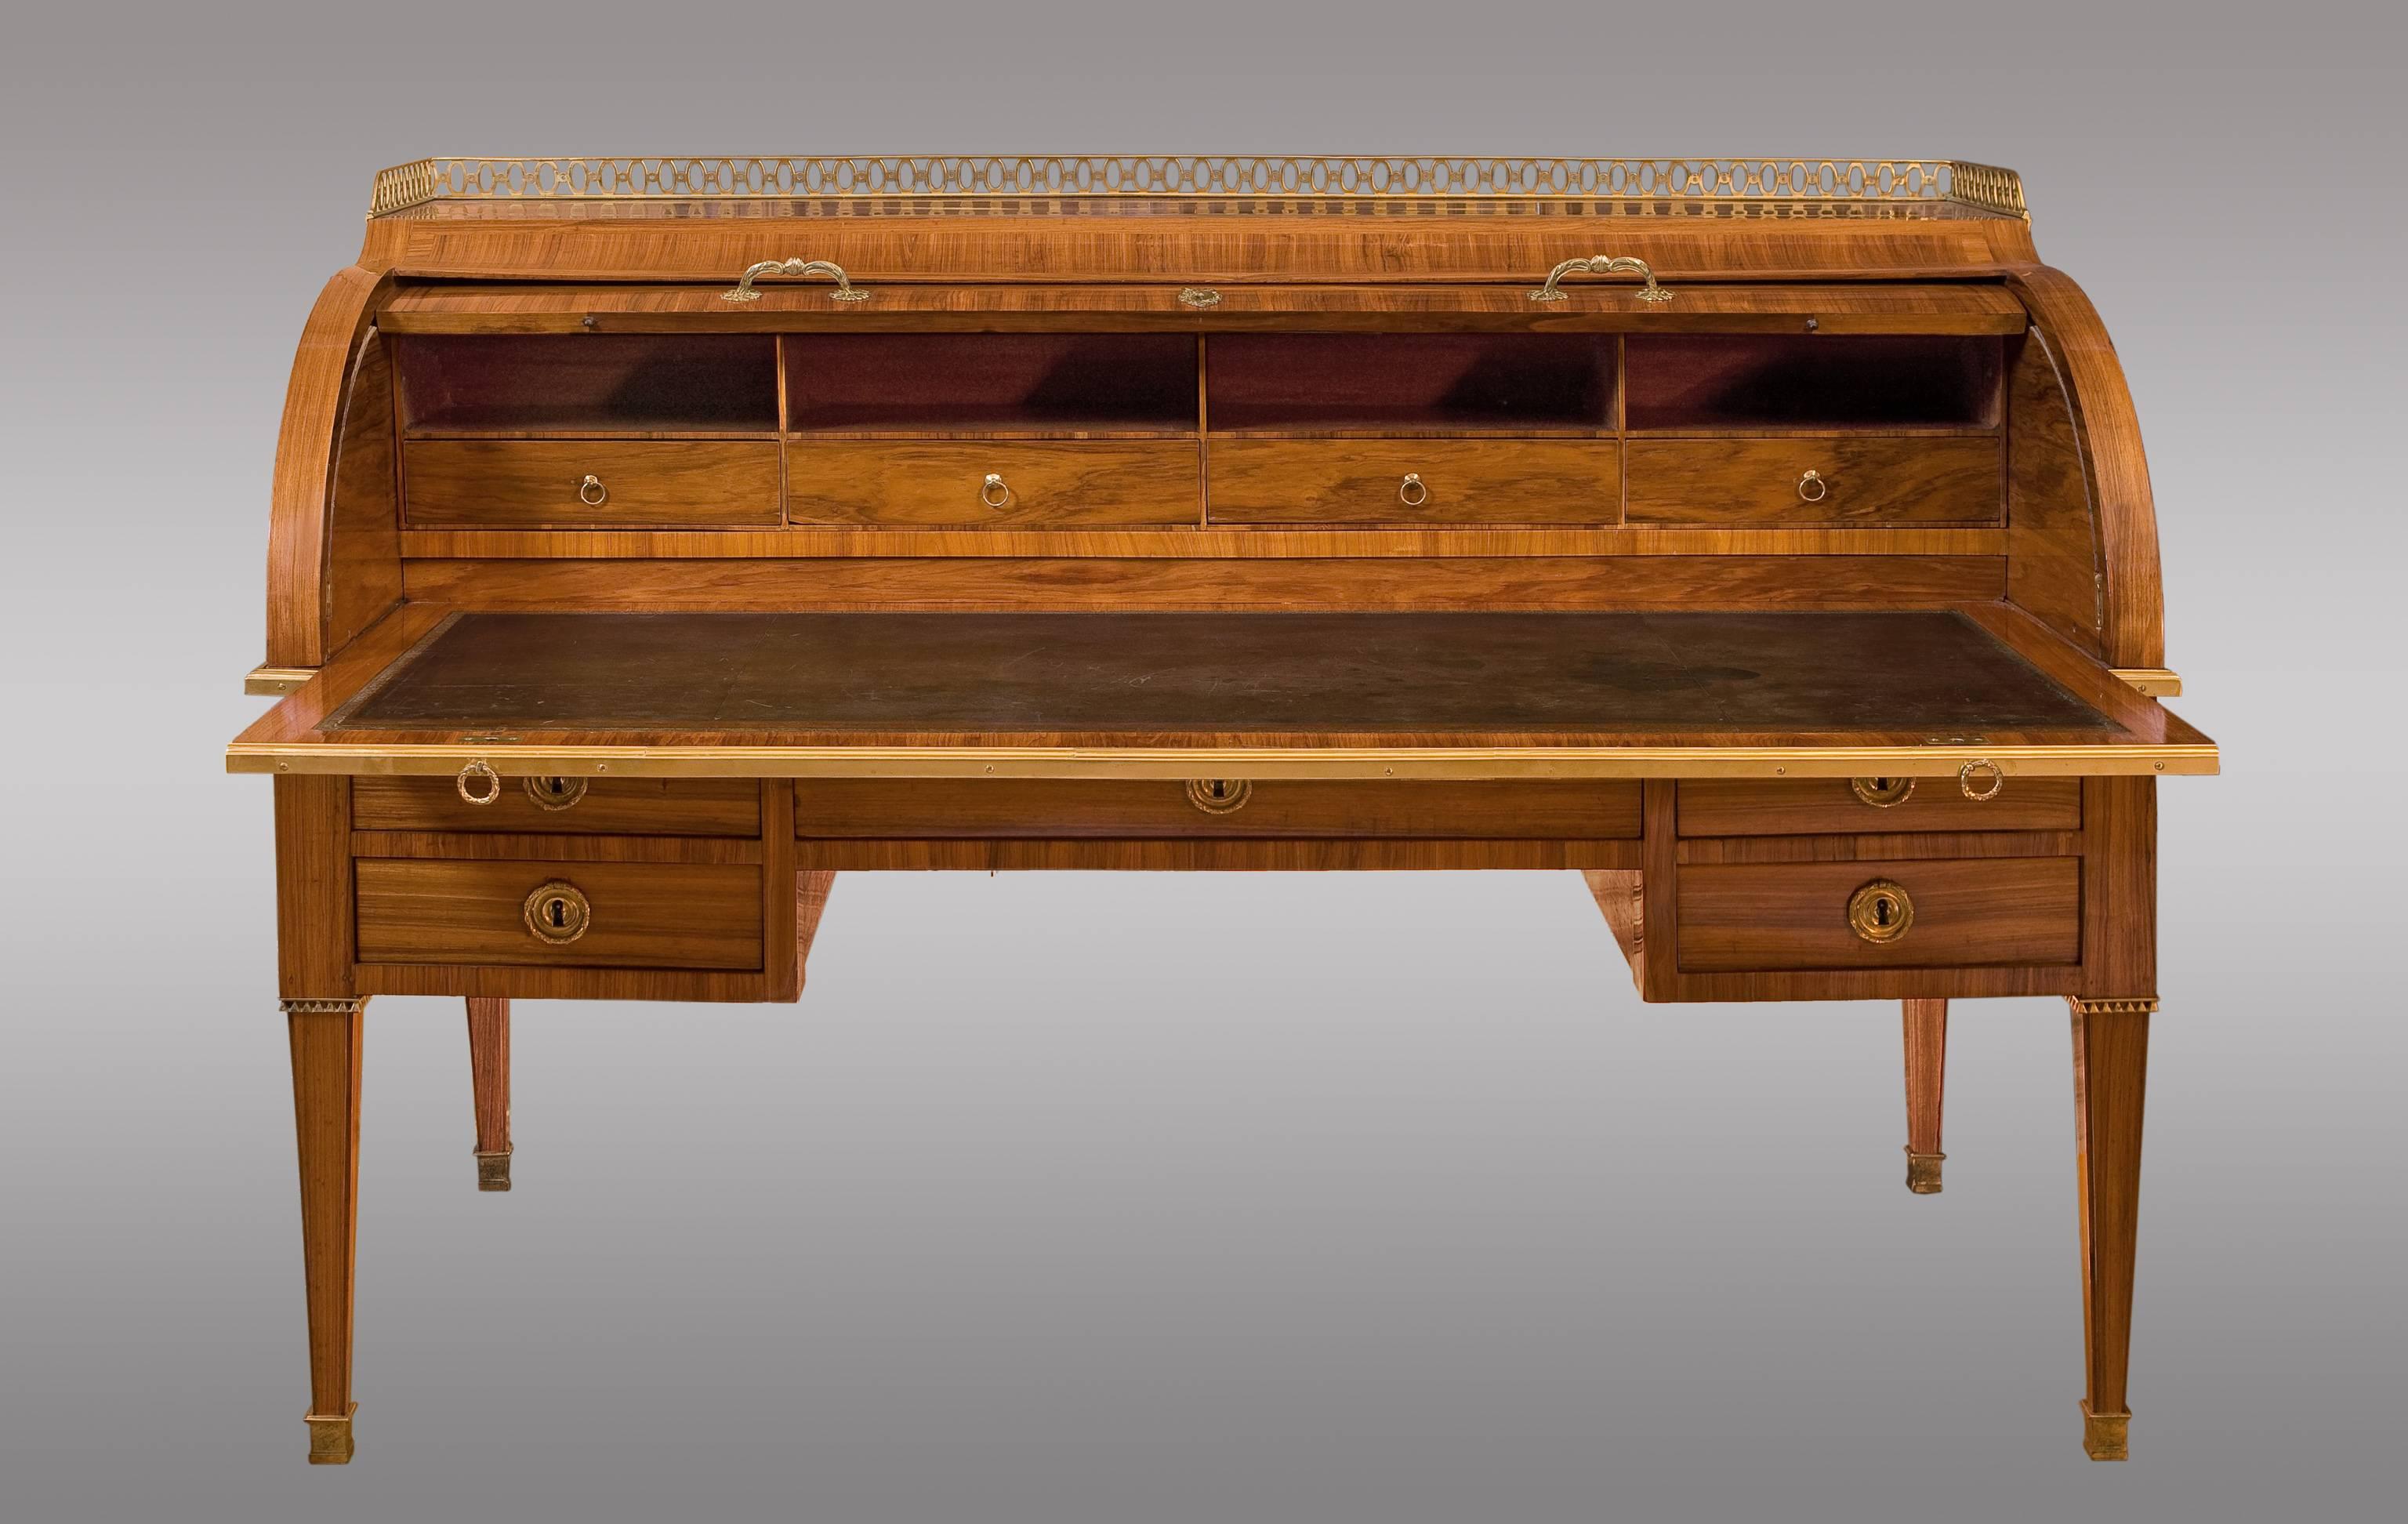 French rosewood cylinder bureau. Louis XVI period.
With gilded bronze. The back also veneered.
Stamped Dubois.